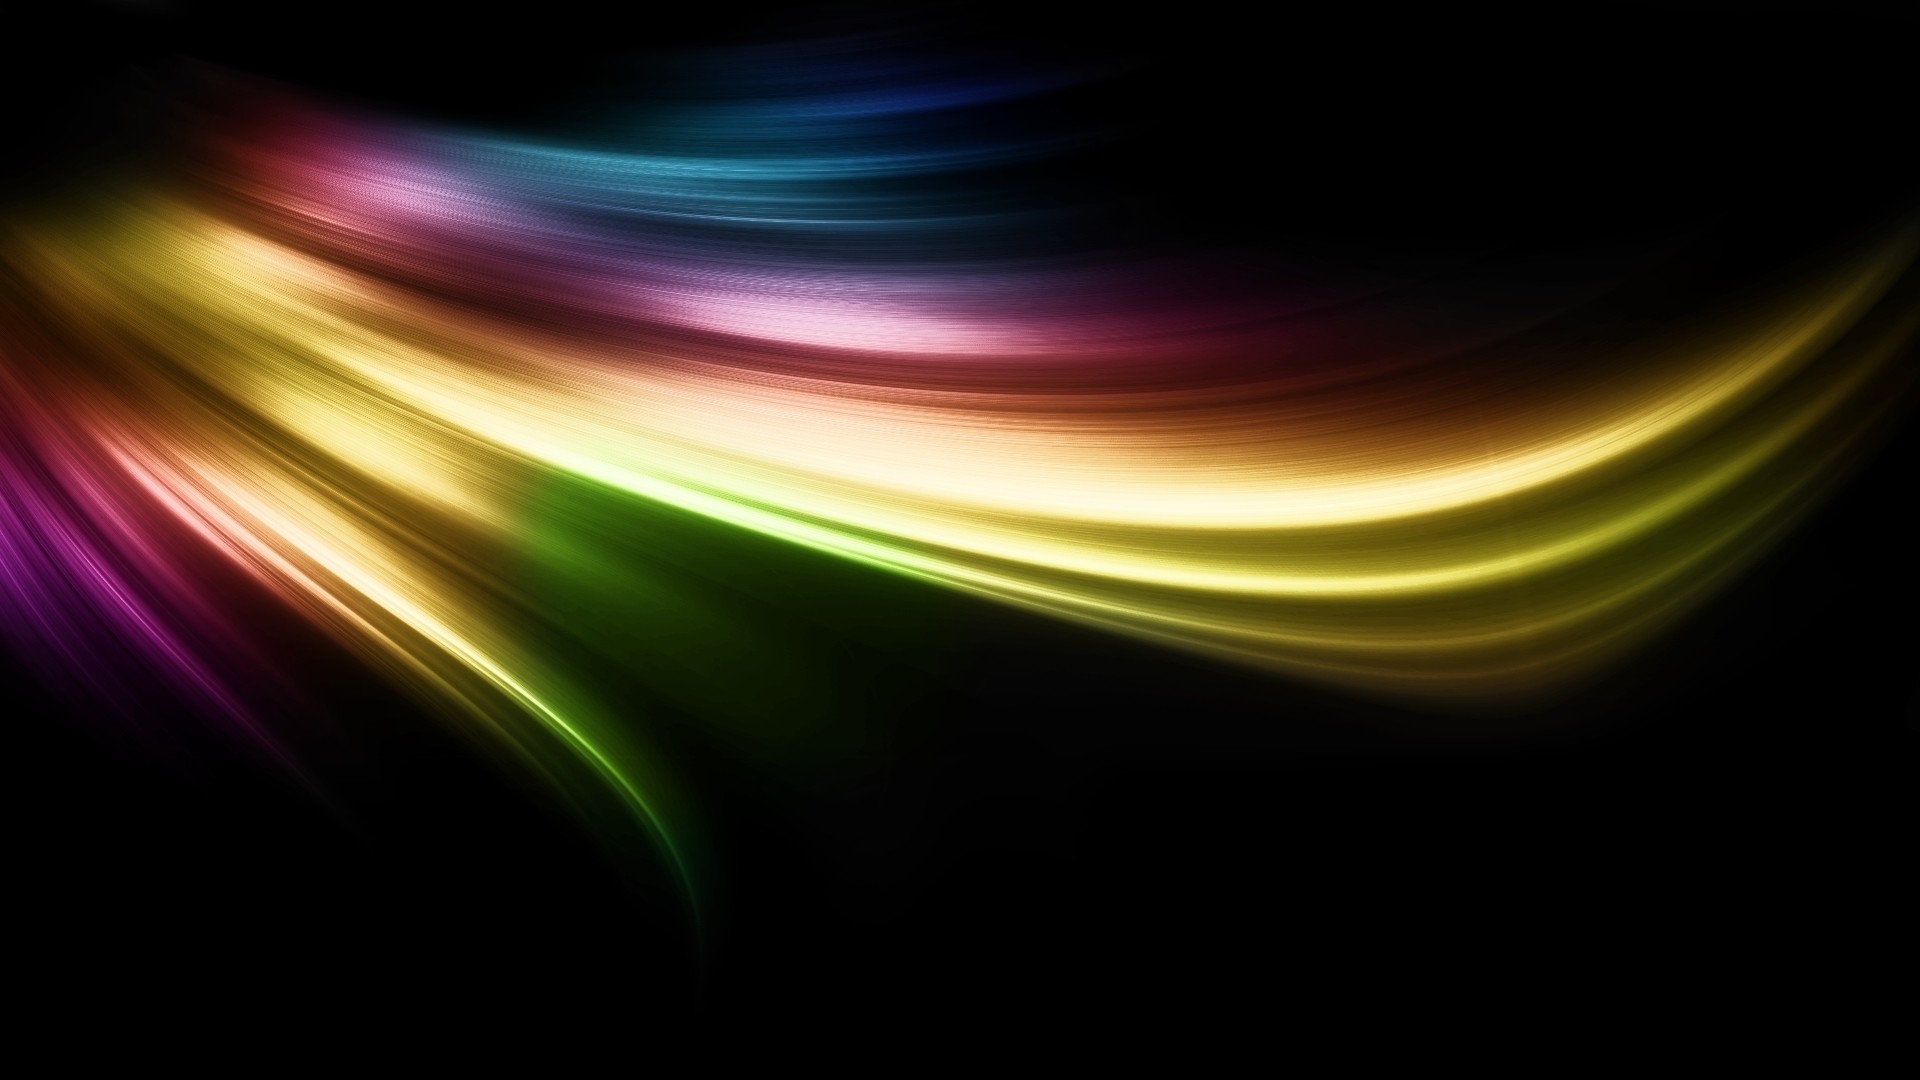 1920x1080 Rainbow Colorful Abstract | http://bestwallpaperhd.com/rainbow-colorful-